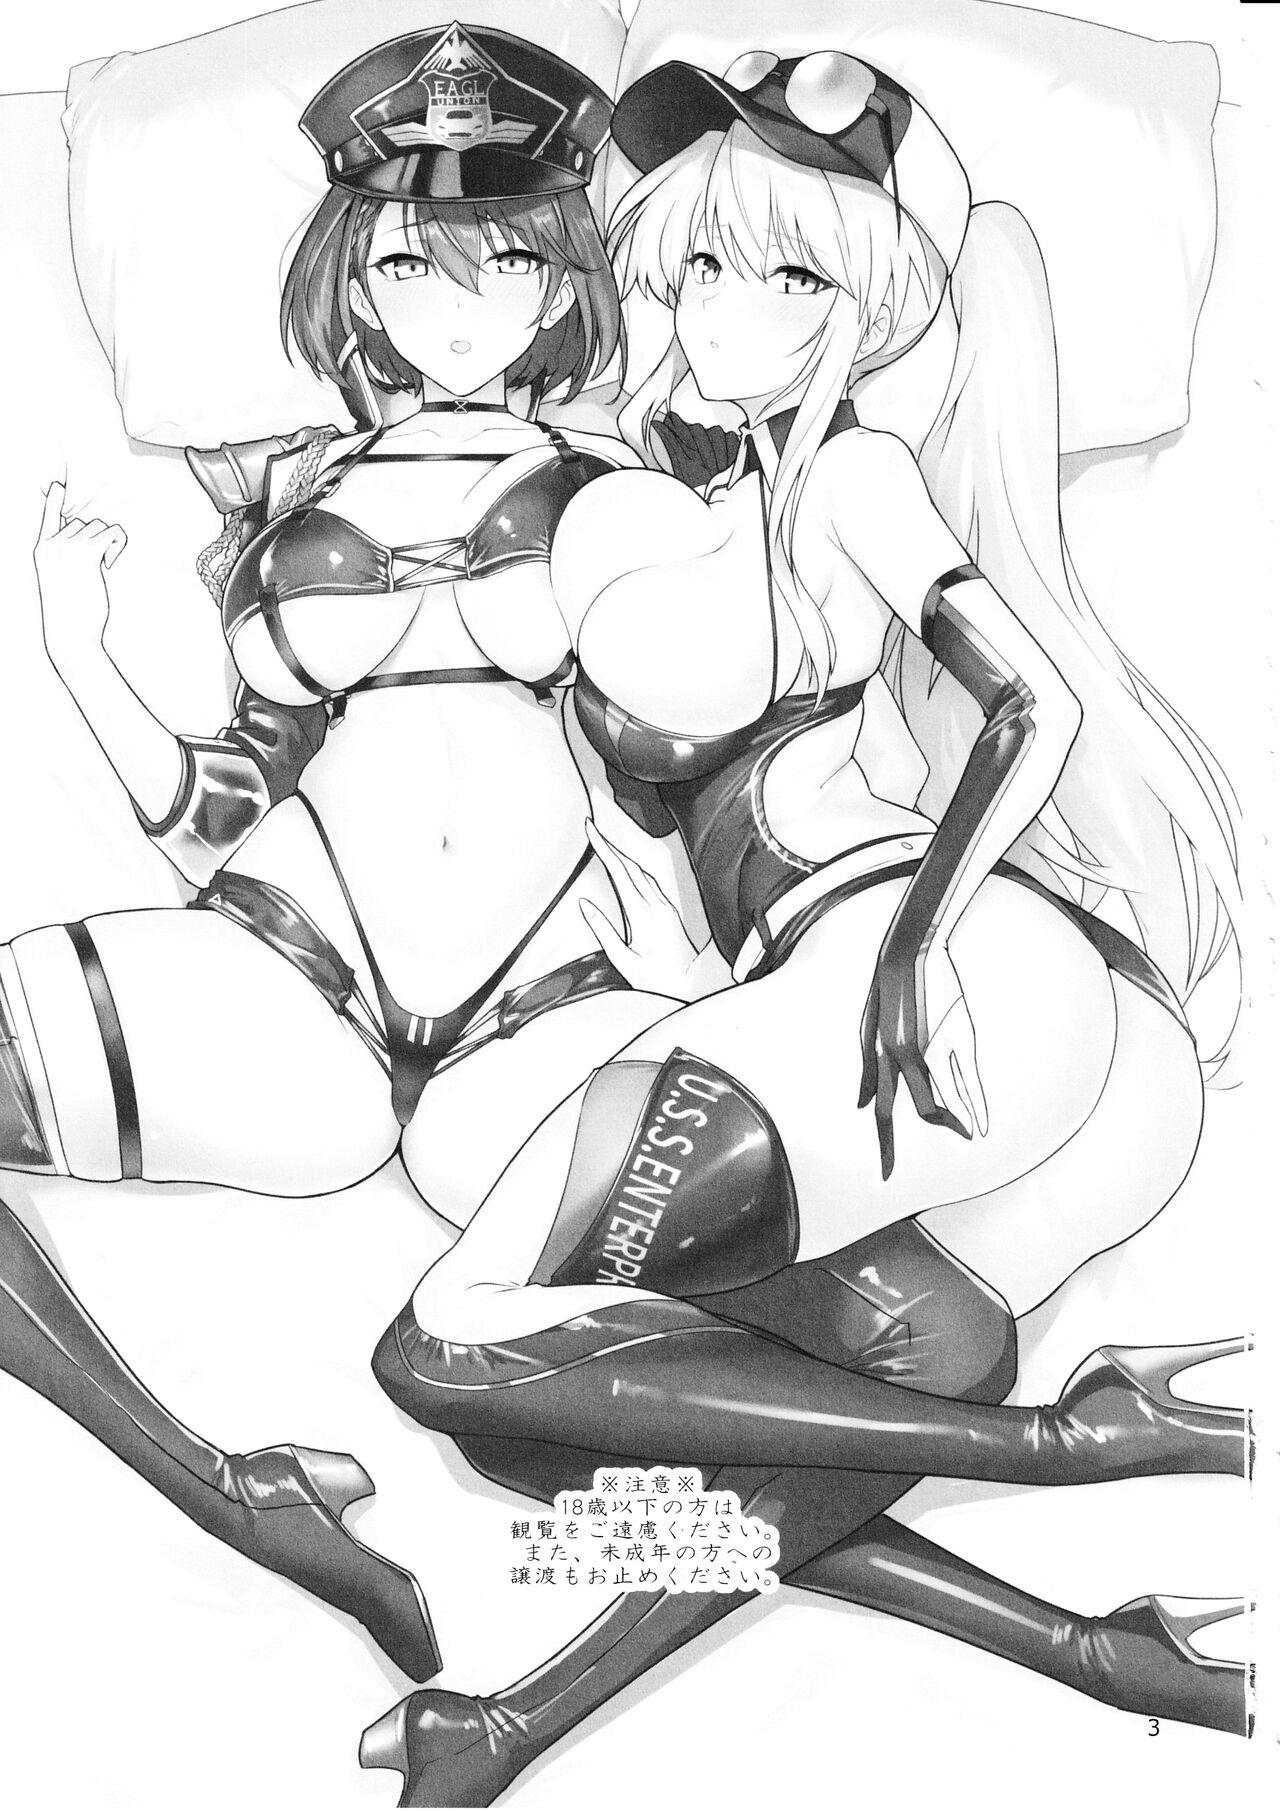 Couple A Book about Race Queens Enterprise and Baltimore being Lewd - Azur lane Breeding - Page 2